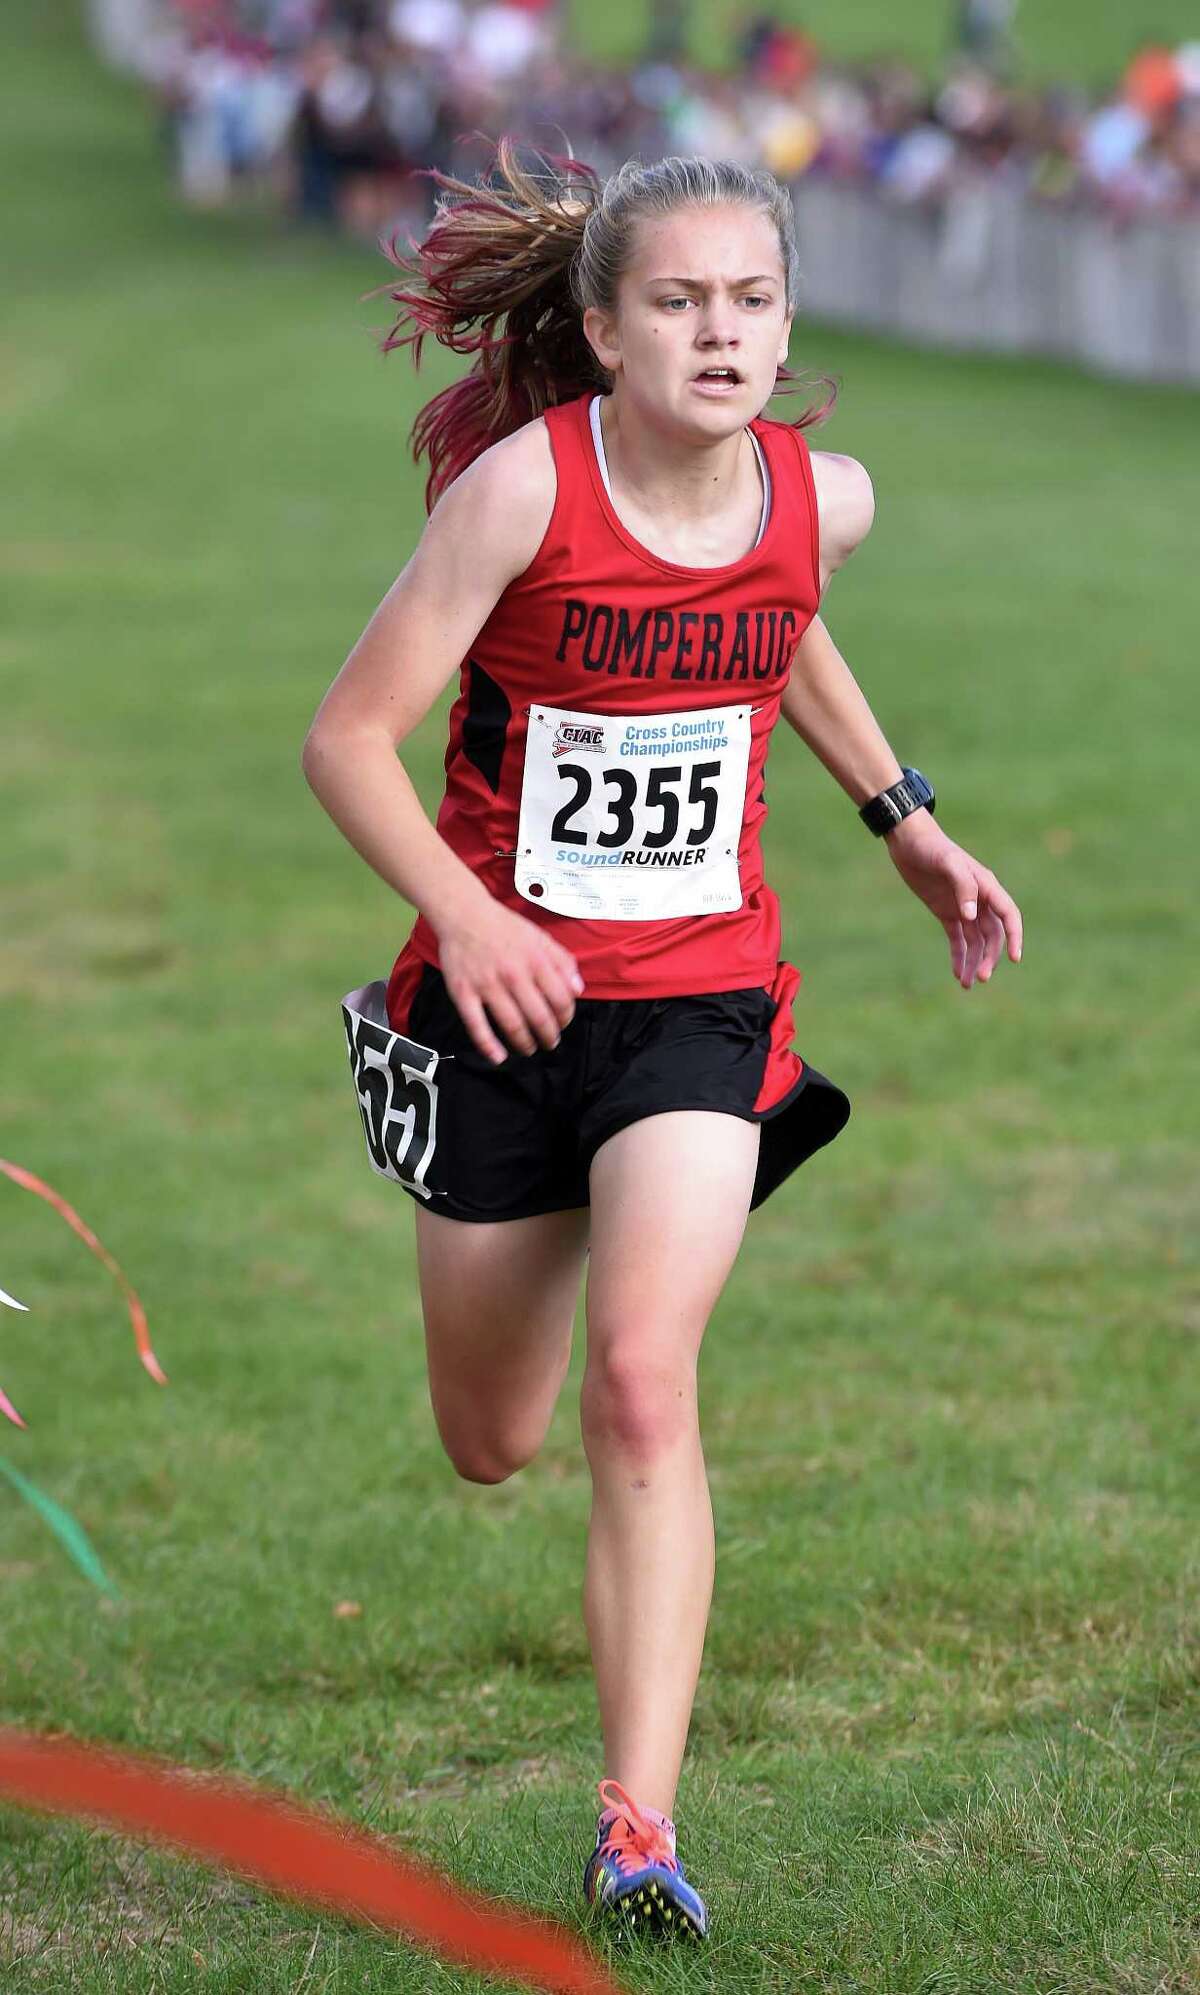 Katherine Wiser of Pomperaug nears the finish line placing second in the 2017 CIAC Fall Championship Girls Cross Country race in Manchester on November 3, 2017.